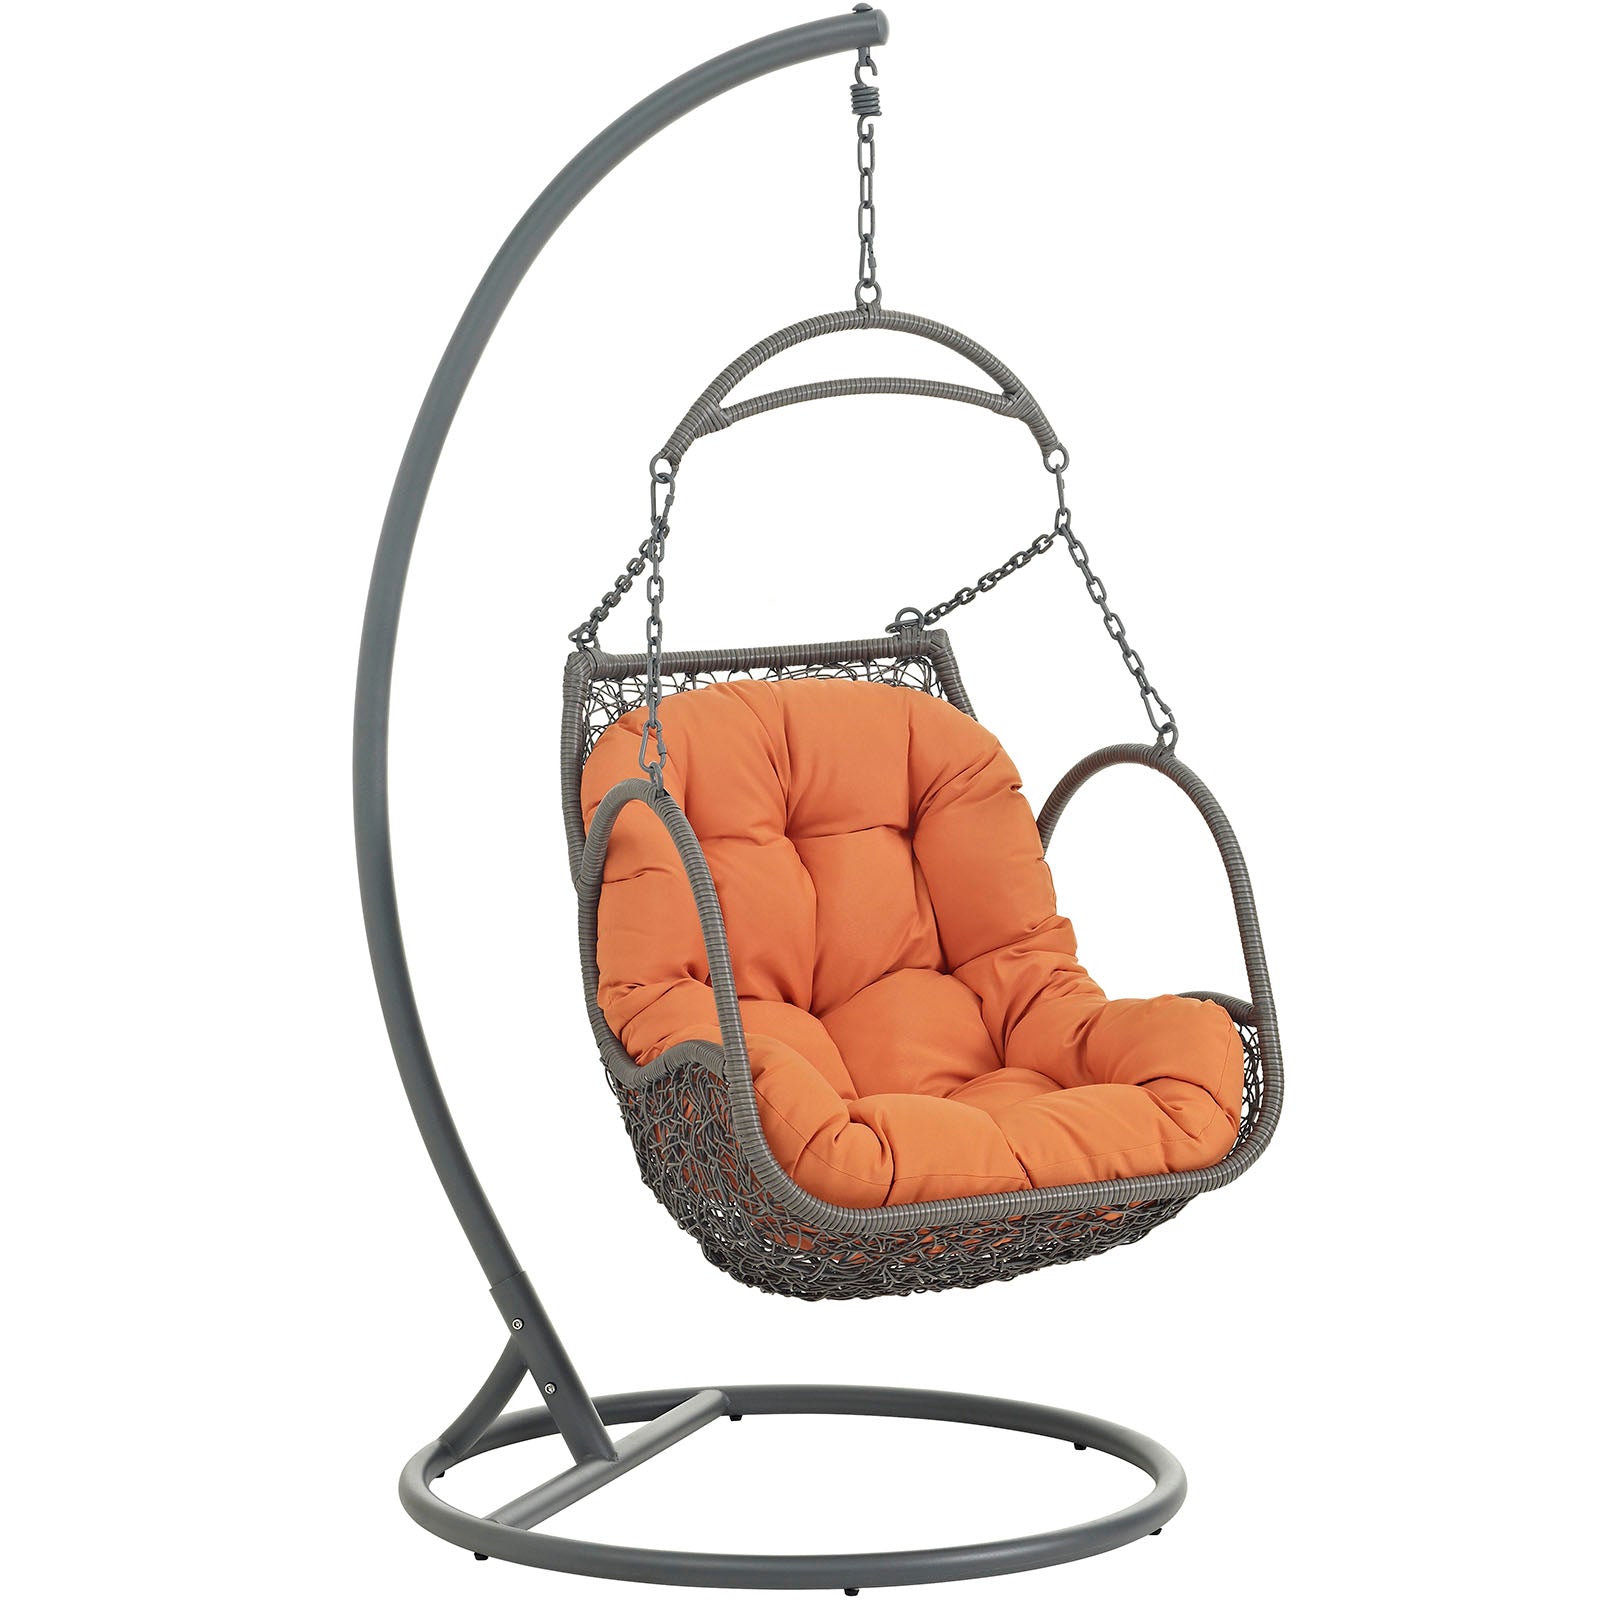 Hanging Arbor Swing Chair - Weather Fastness Hanging Chair With Cushions In Multicolor - Swing Chair With Stand